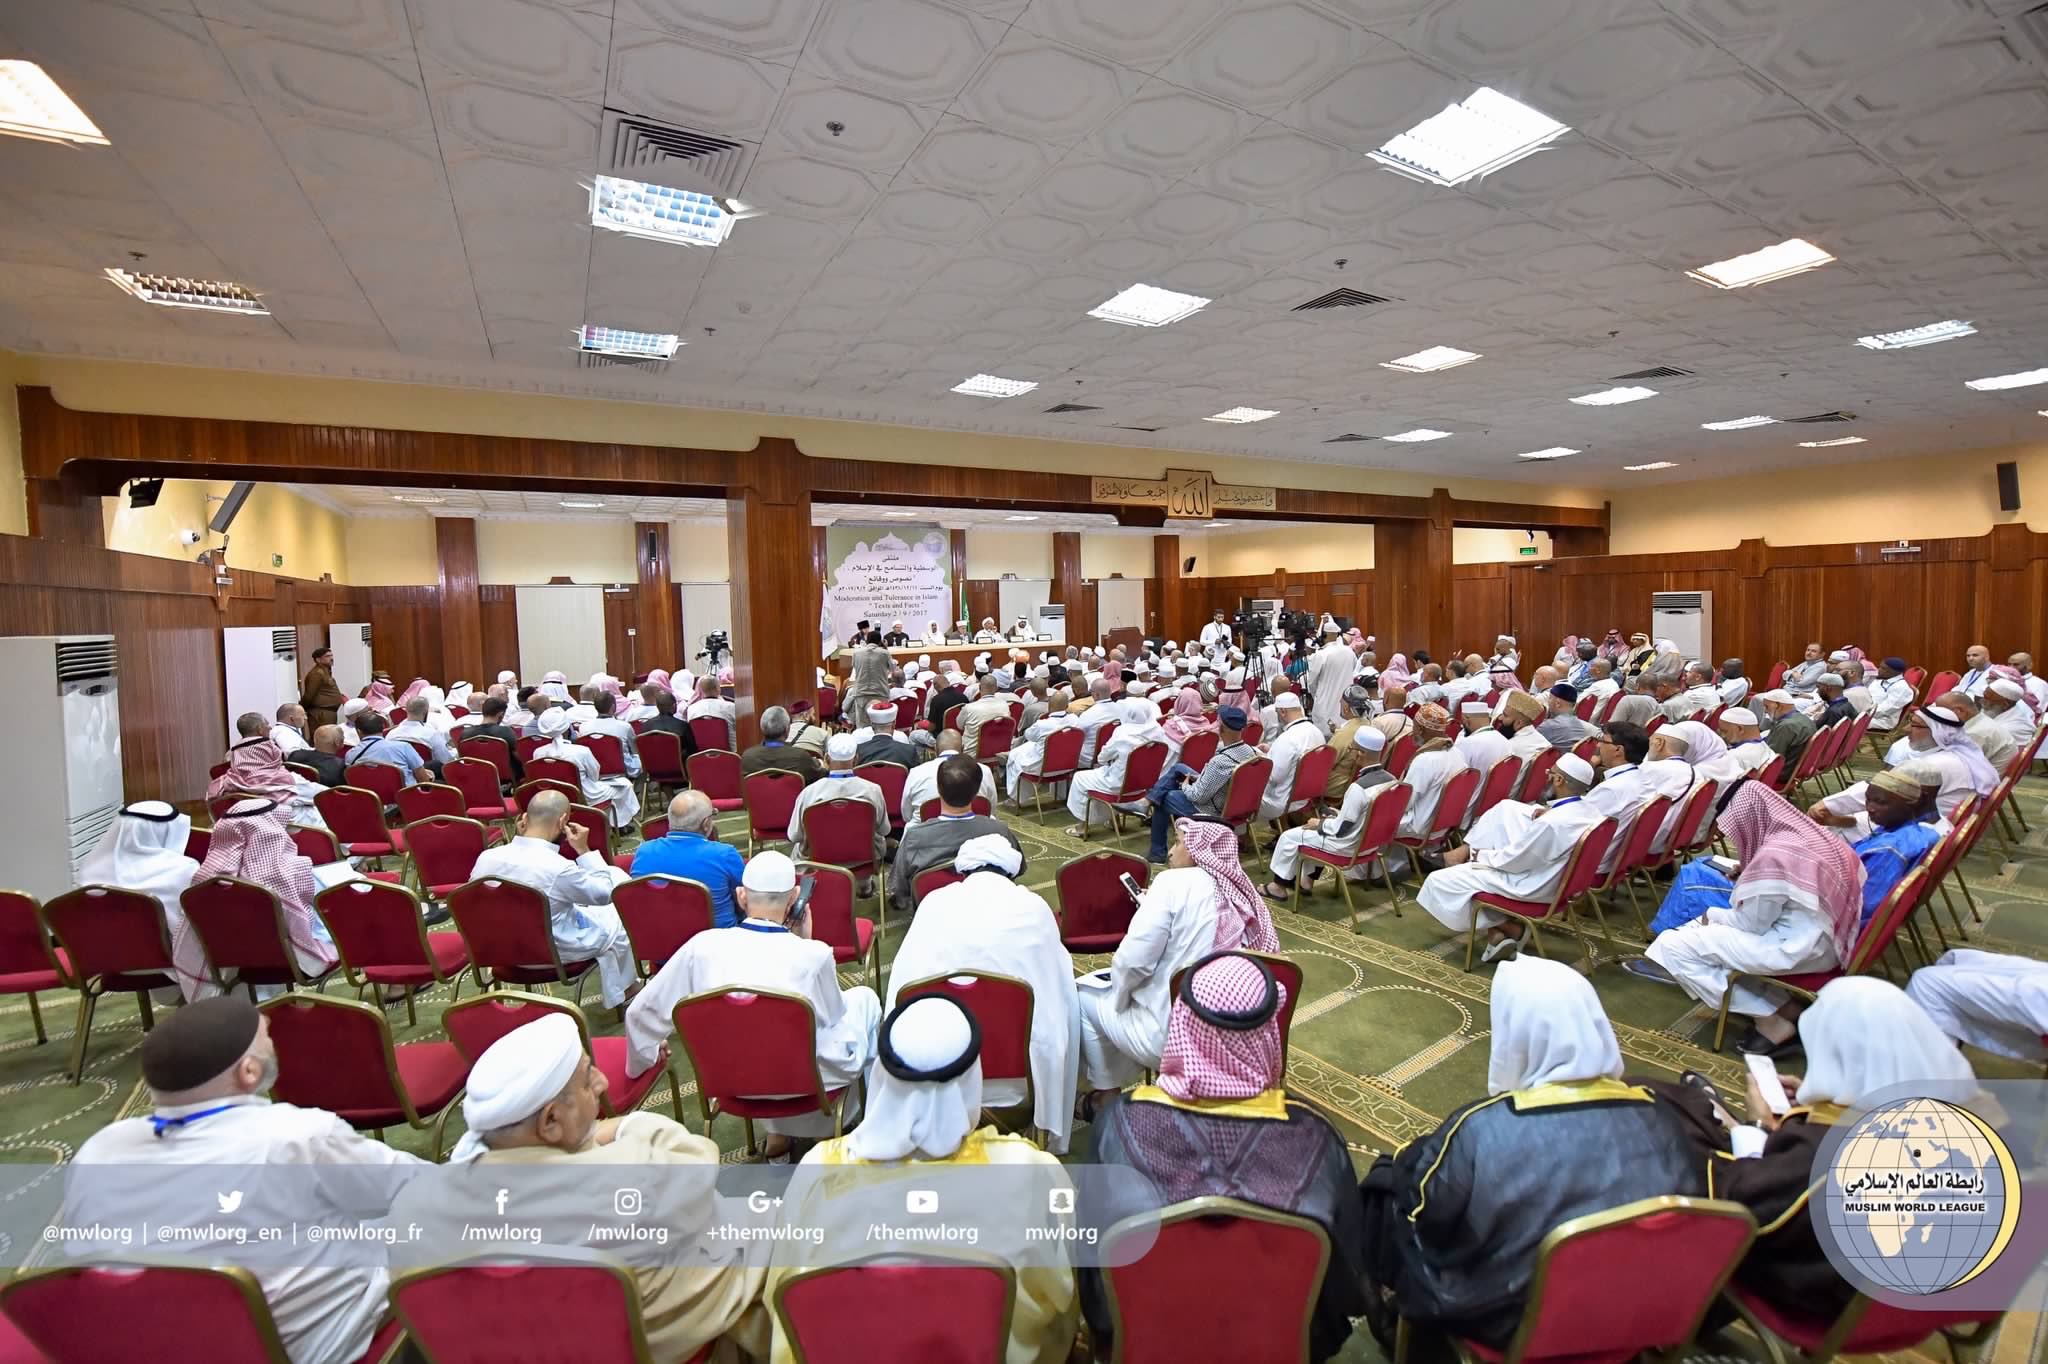 Many Muslim World Muftis attend in this year Hajj in Mina MWL Forum-Conf. on Moderation & Tolerance in Islam-Texts&Facts